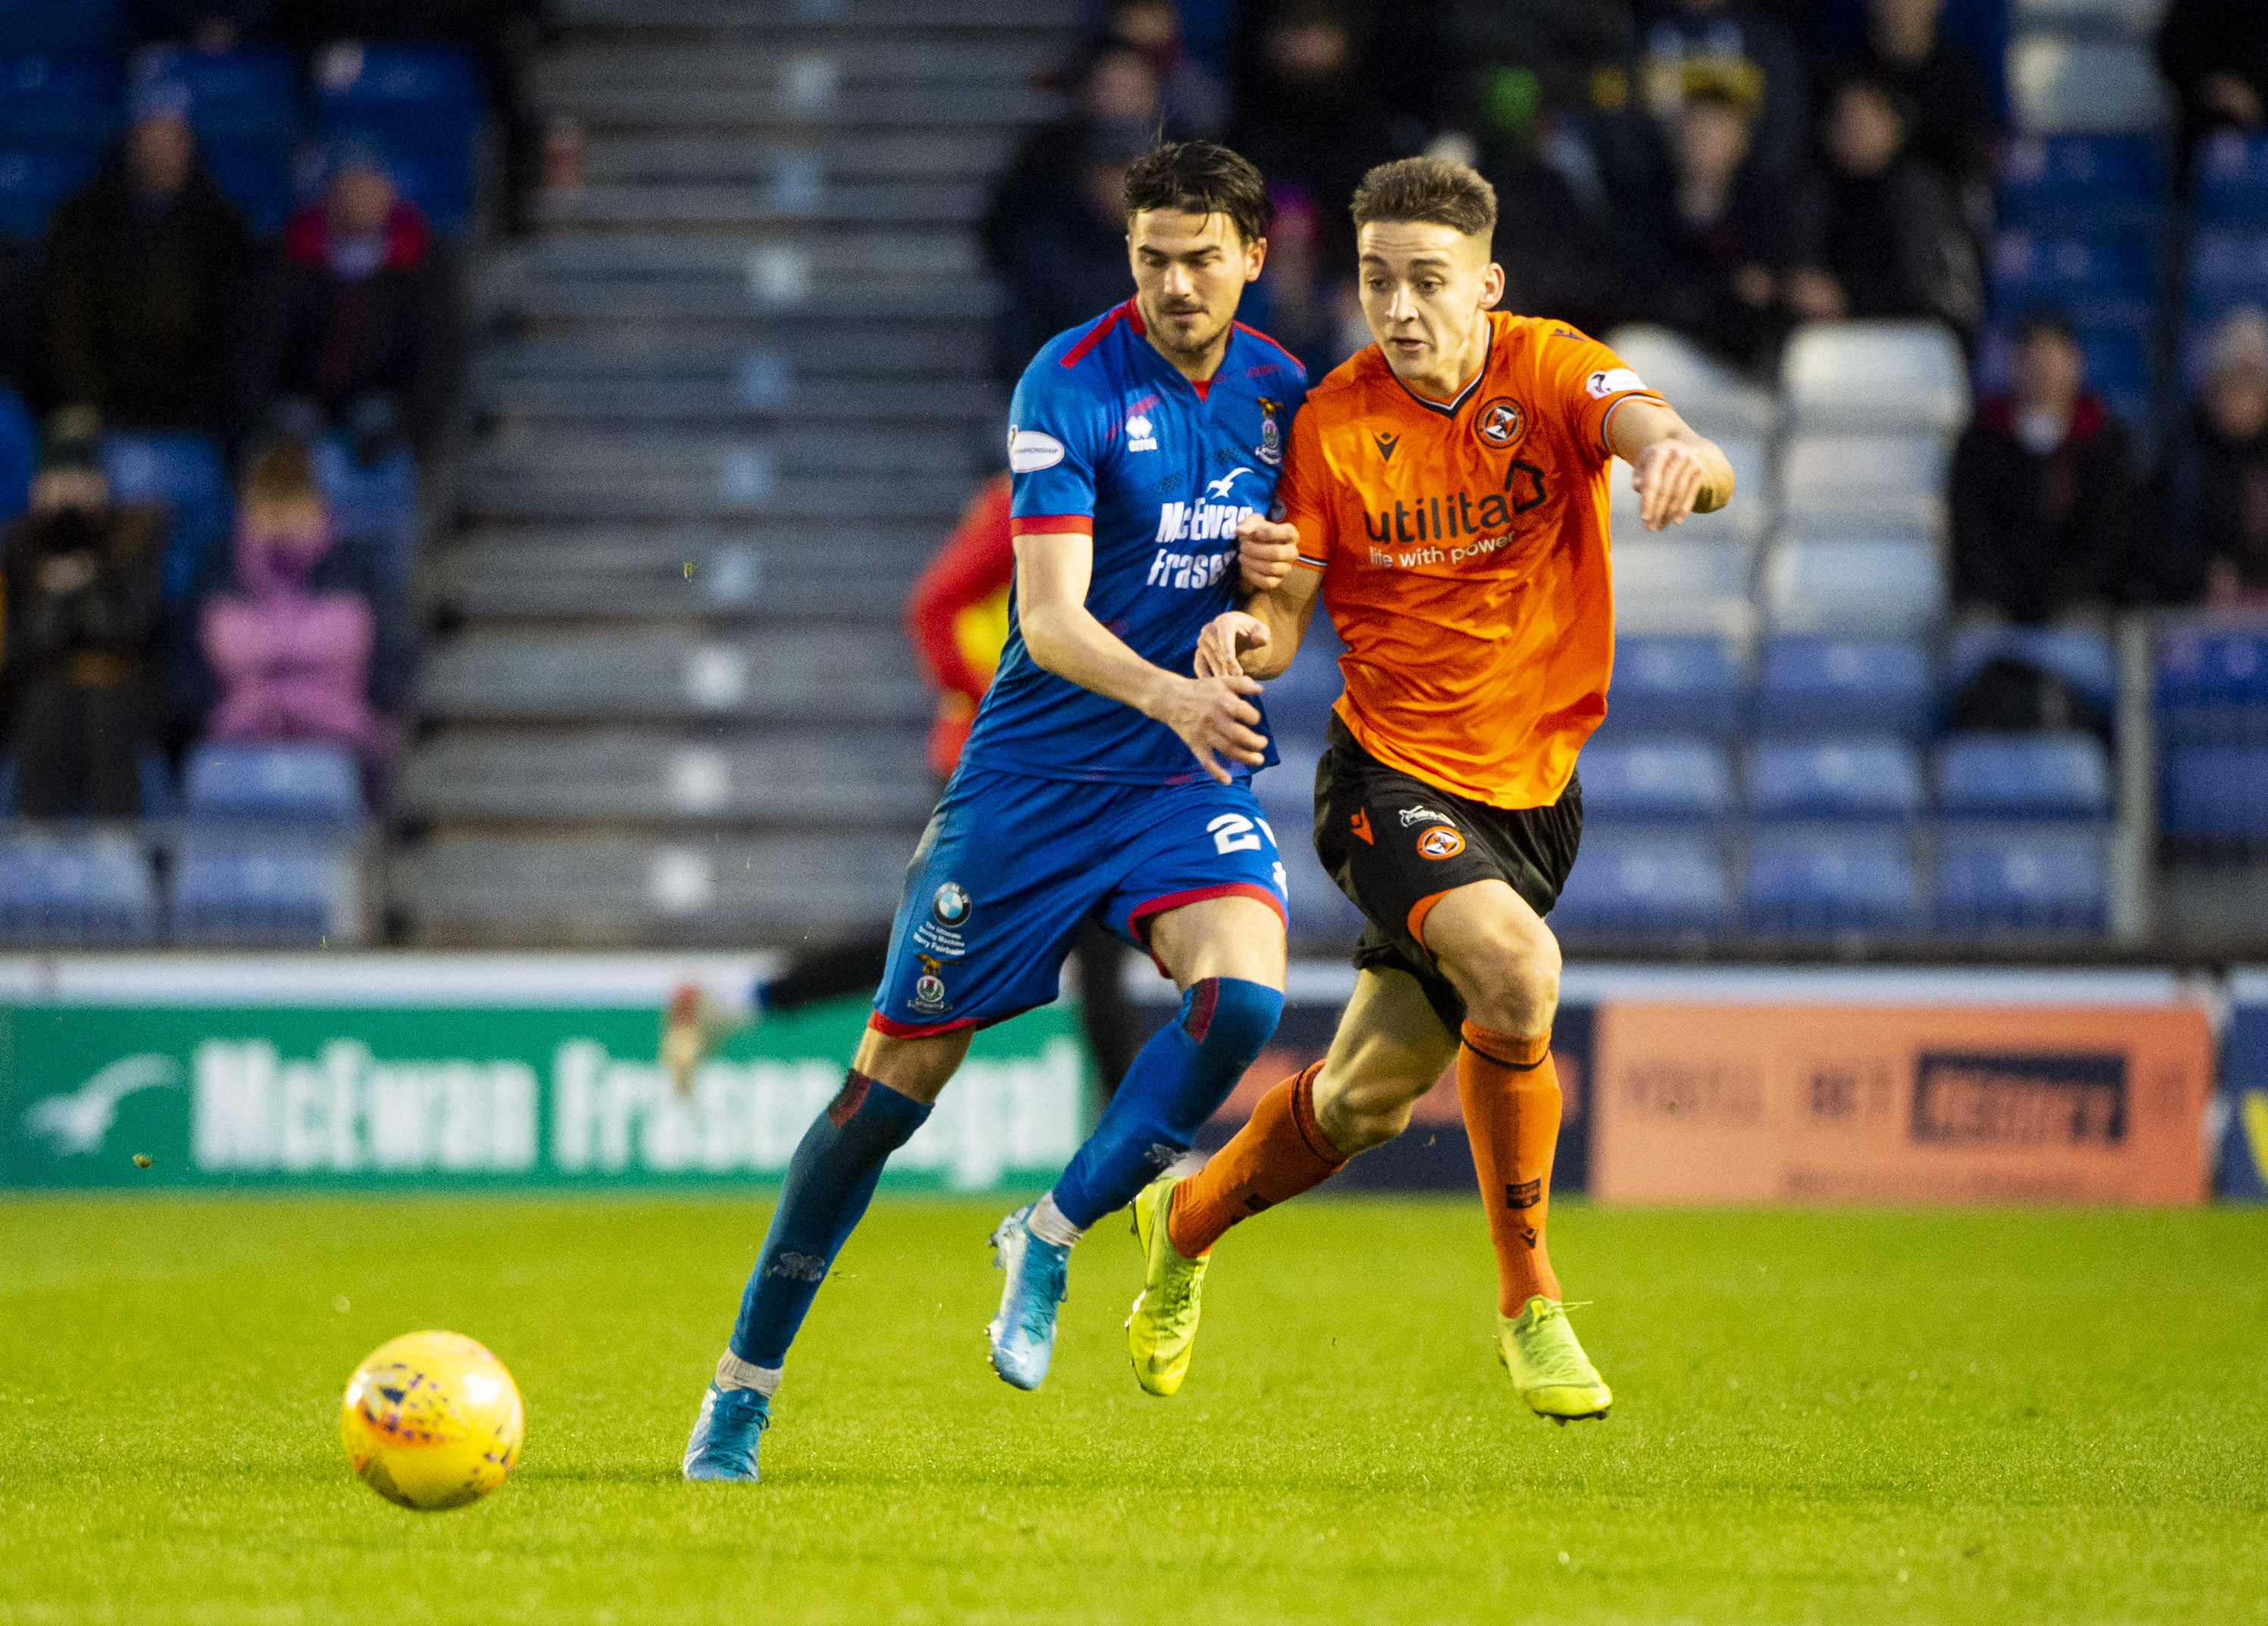 Dundee Utd's Louis Appere, right, and Charlie Trafford in action during the Ladbrokes Championship match between Inverness CT and Dundee United at the Caledonian Stadium, on November 2.